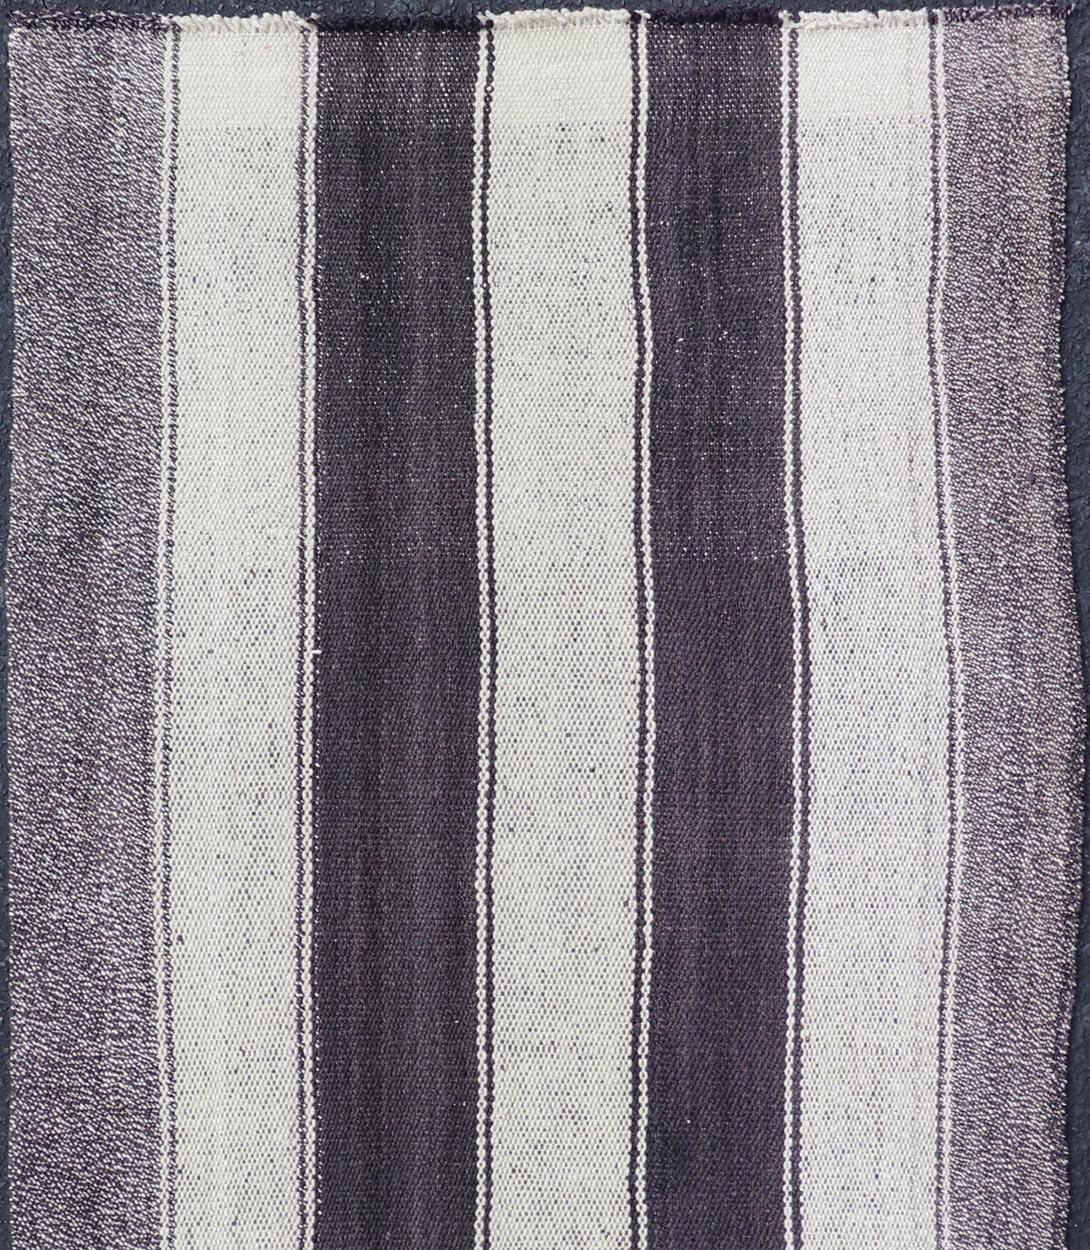 Measures: 2'7 x 6'2 

This vintage flat weave Kilim has a very modern stripe design. Rendered in ebony, cream. With neutral colors and simple design, this flat weave is perfect for any modern and transitional interior. 

Country of Origin: Turkey;